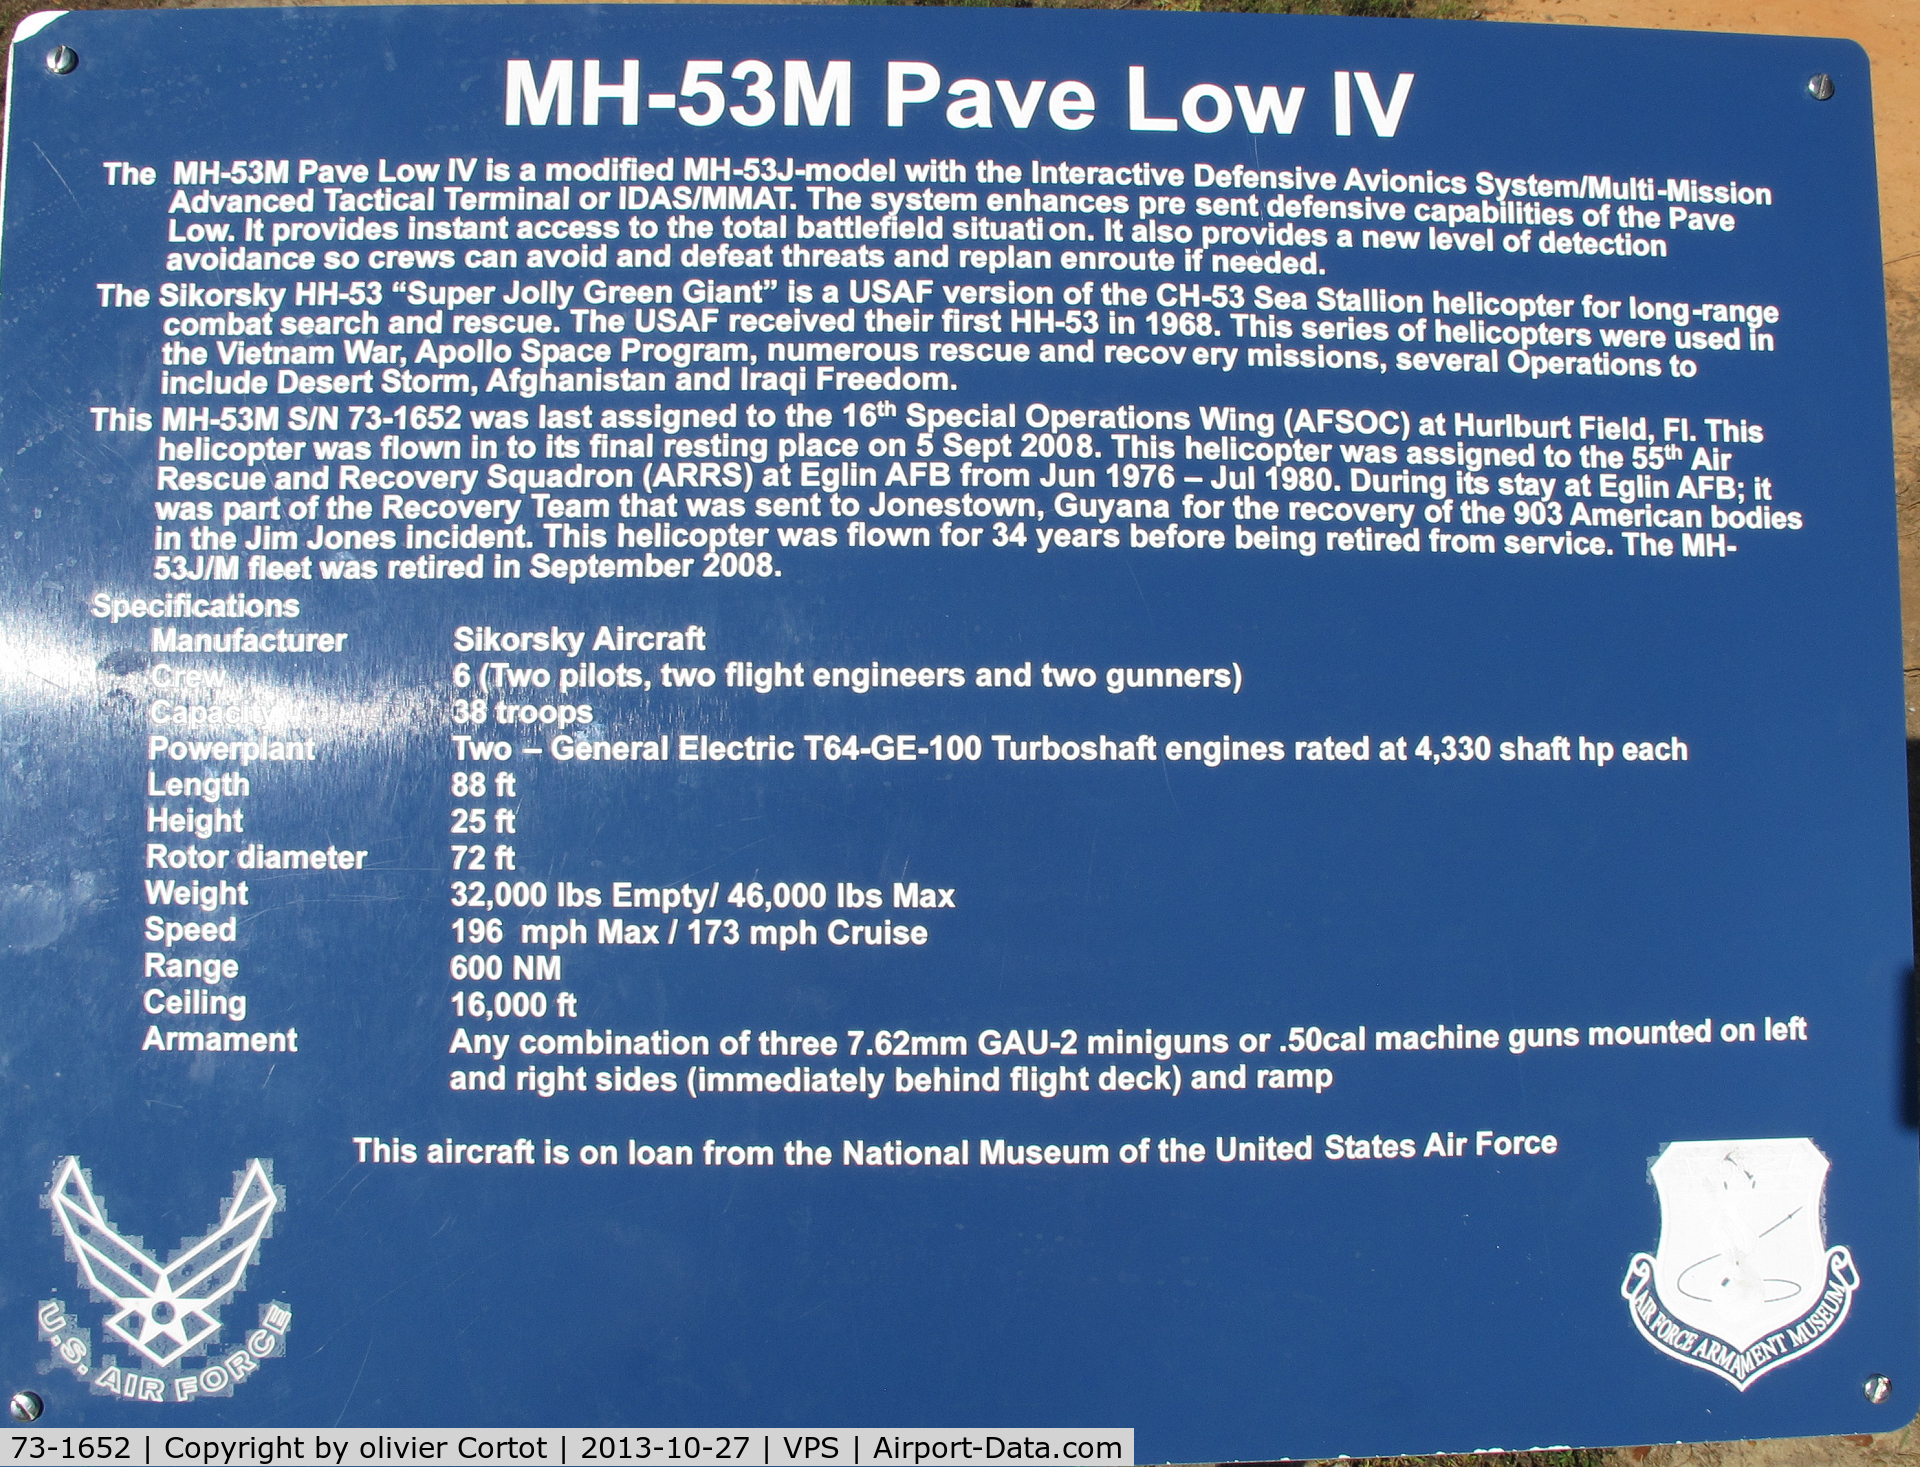 73-1652, 1973 Sikorsky MH-53M Pave Low IV C/N 65-390, history of the plane